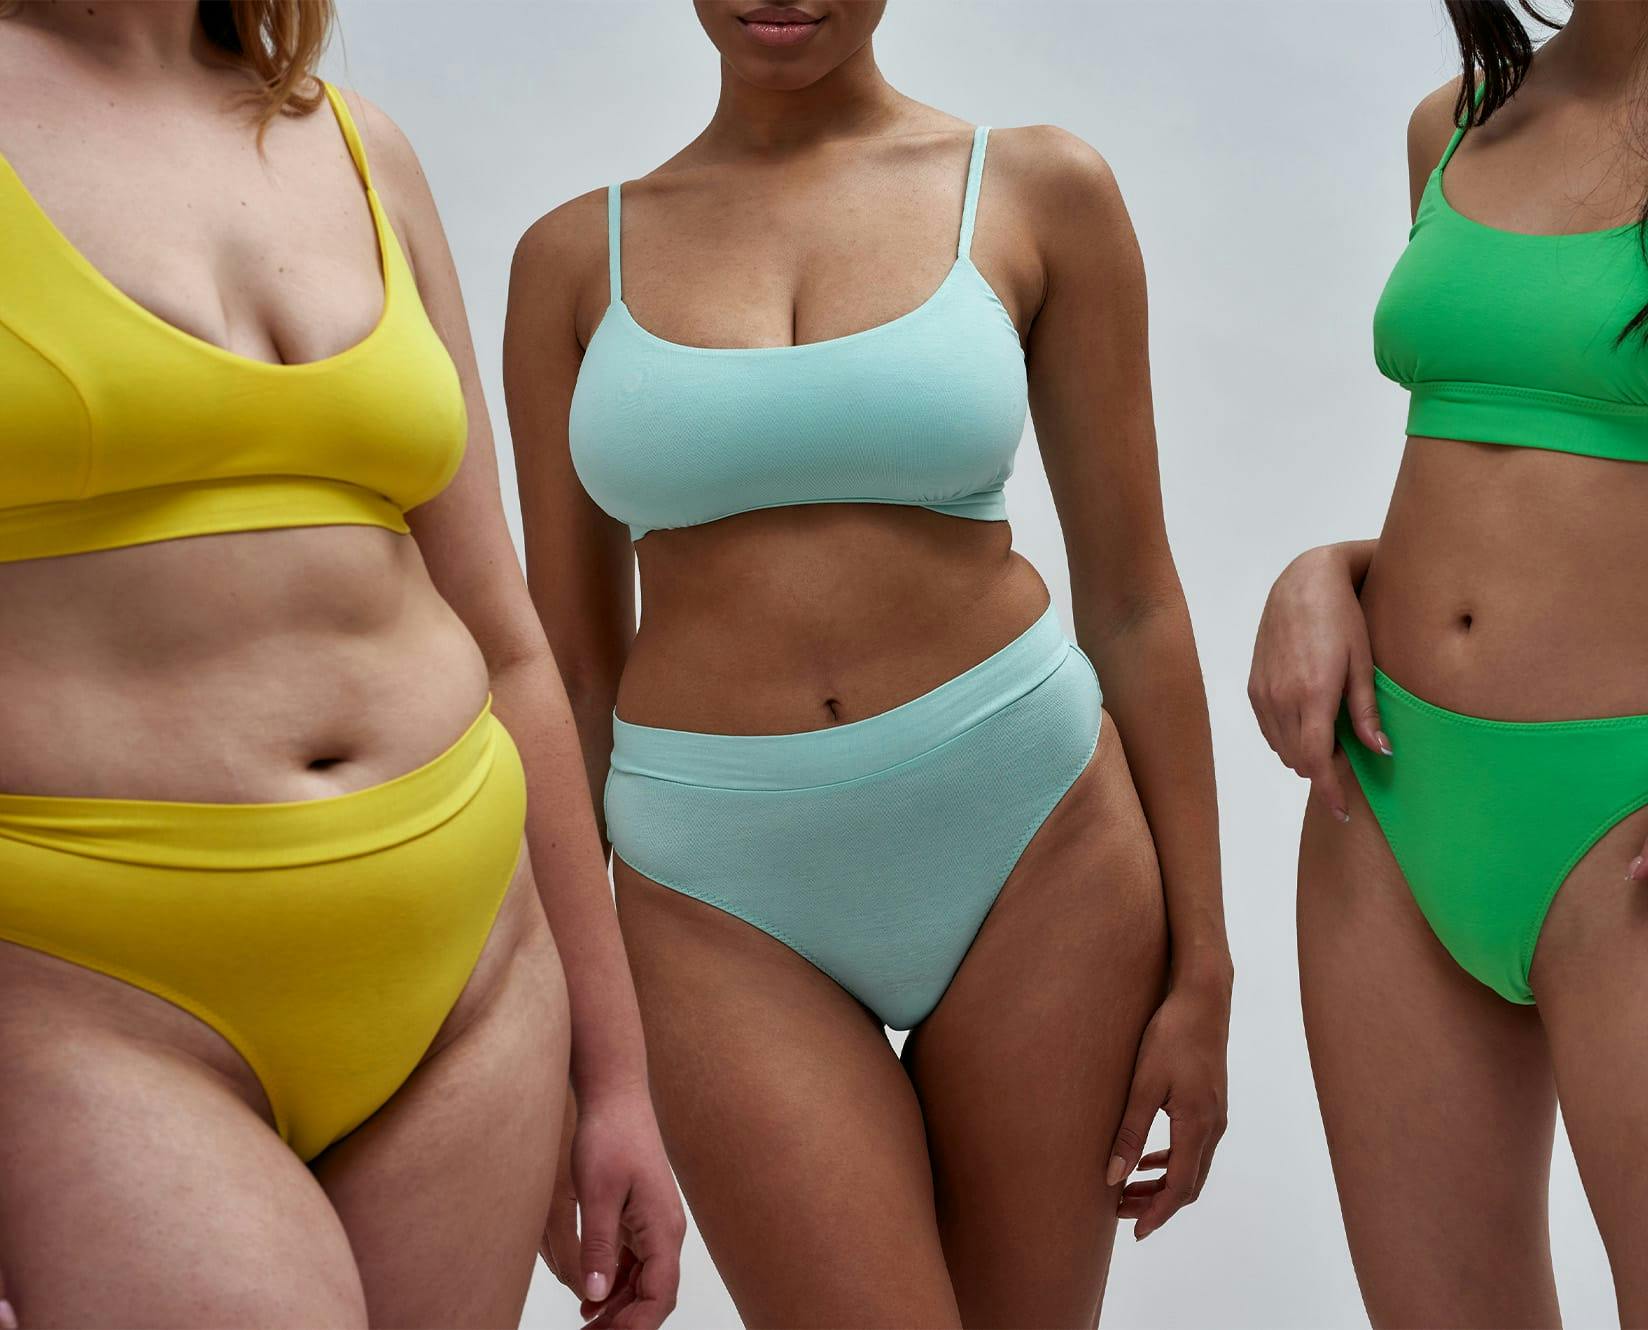 3 women in different color bikinis, 3 different sizes